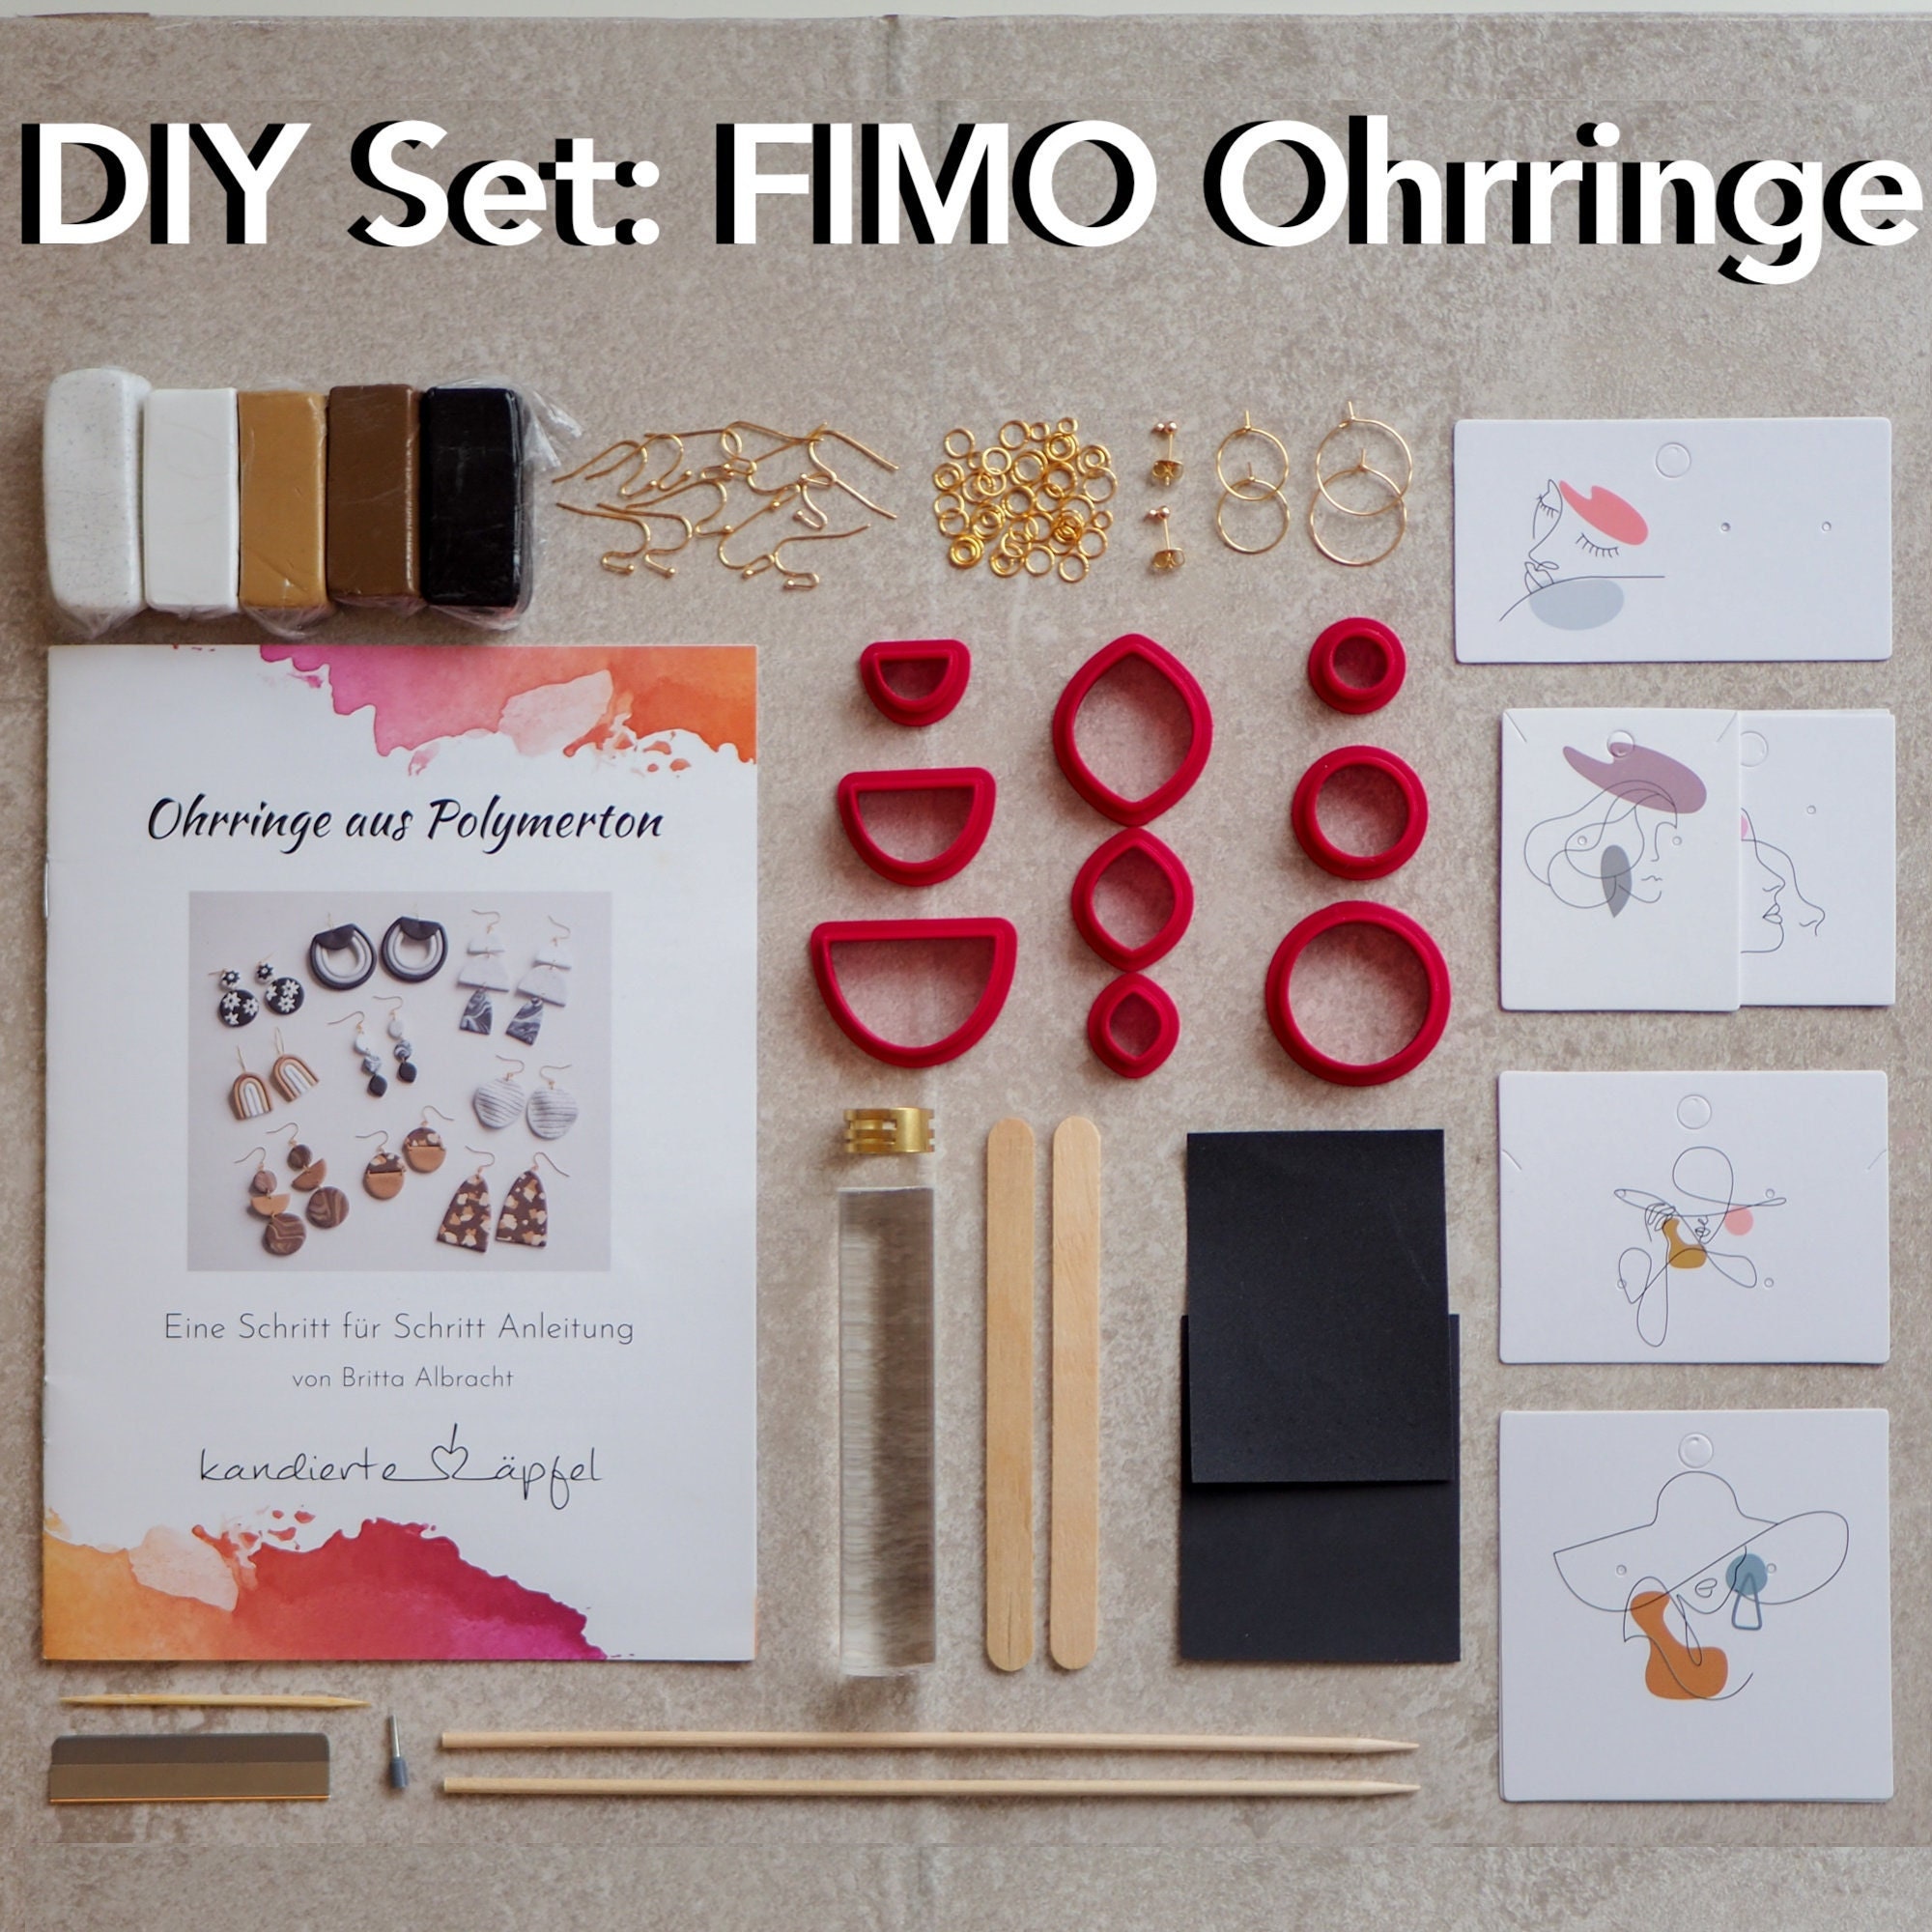 Build Your Own Polymer Clay Earrings Kit Including Charms and Decals. Make  5 Pairs of Statement Dangle Earrings. 